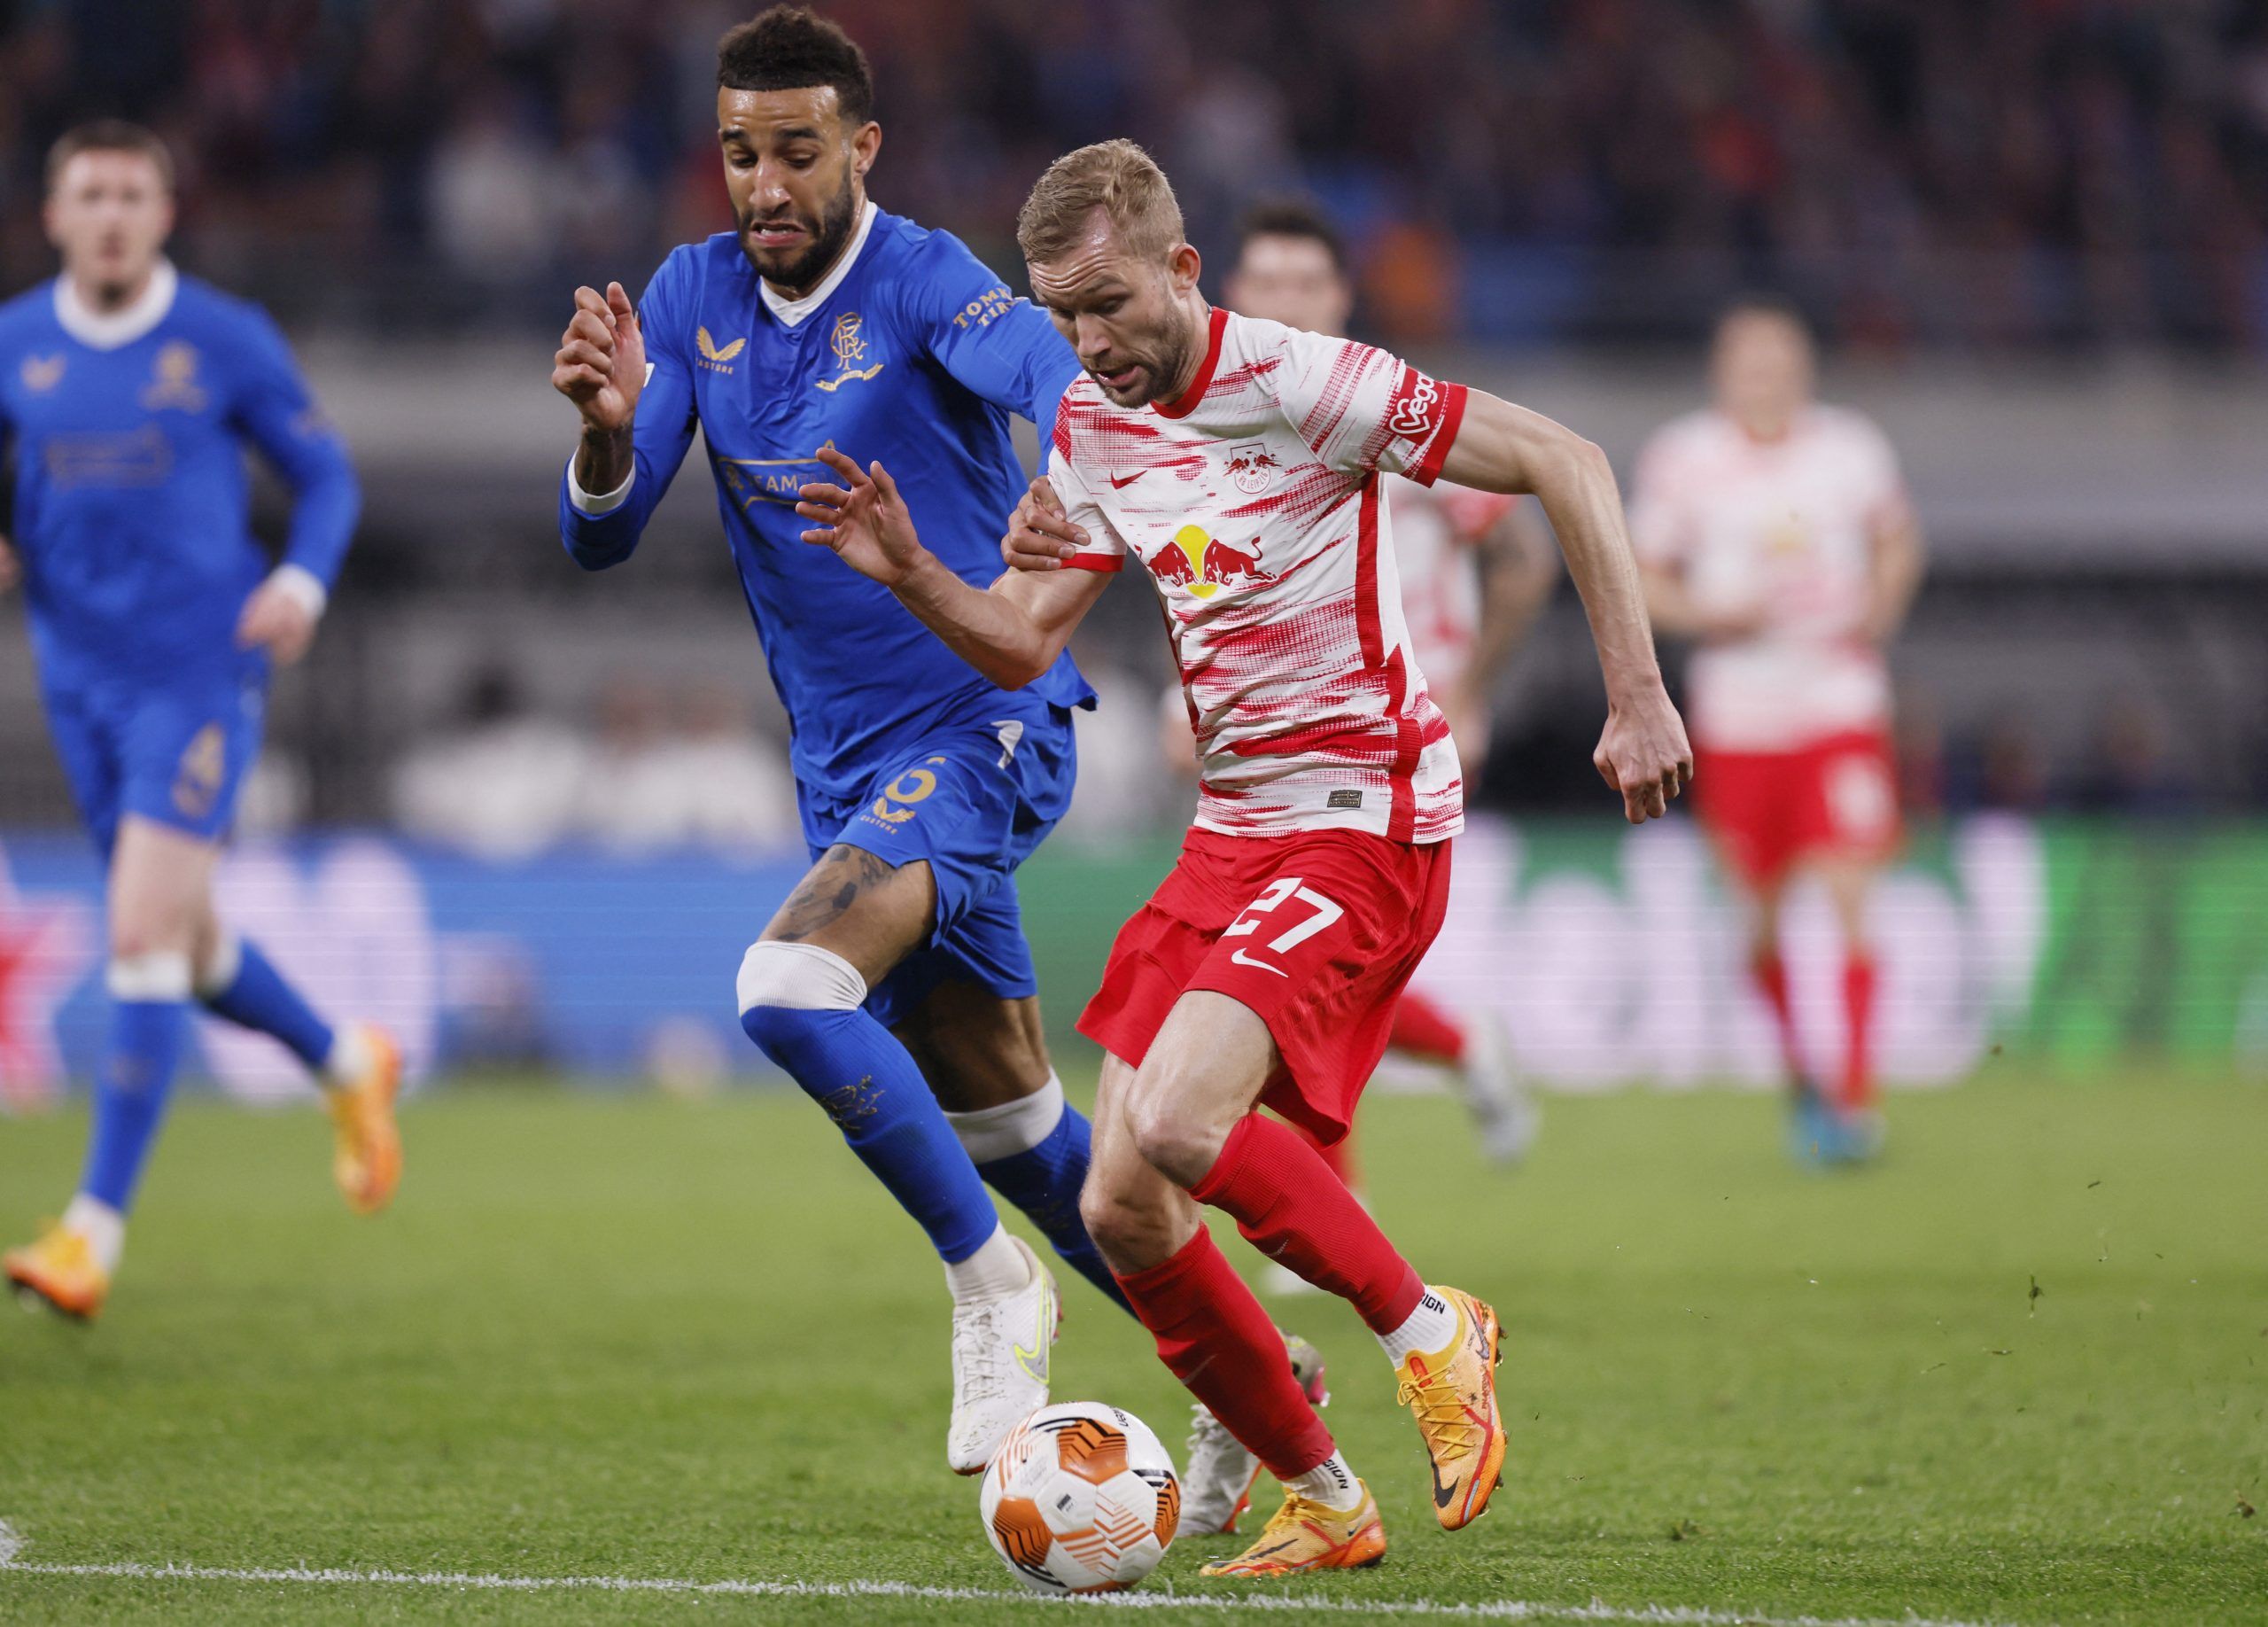 Soccer Football - Europa League - Semi Final - First Leg - RB Leipzig v Rangers - Red Bull Arena, Leipzig, Germany - April 28, 2022 Rangers' Connor Goldson in action with RB Leipzig's Konrad Laimer Action Images via Reuters/Andrew Couldridge